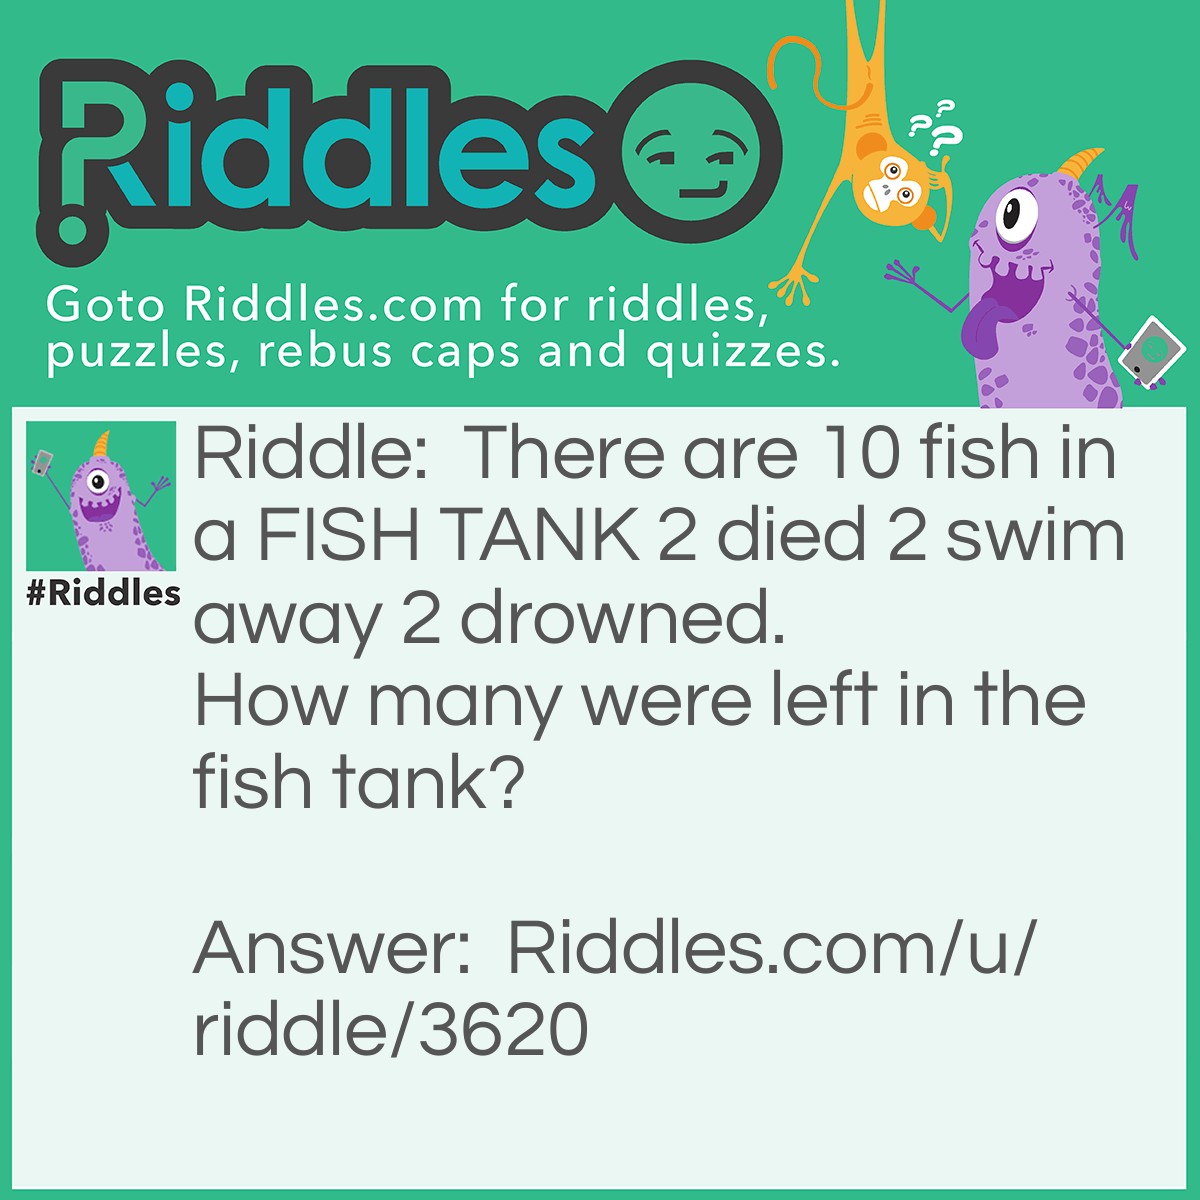 Riddle: There are 10 fish in a FISH TANK 2 died 2 swim away 2 drowned.  How many were left in the fish tank? Answer: 8, because the fish can't swim away in a FISH TANK and fish can't drown but 2 died 10-2=8.